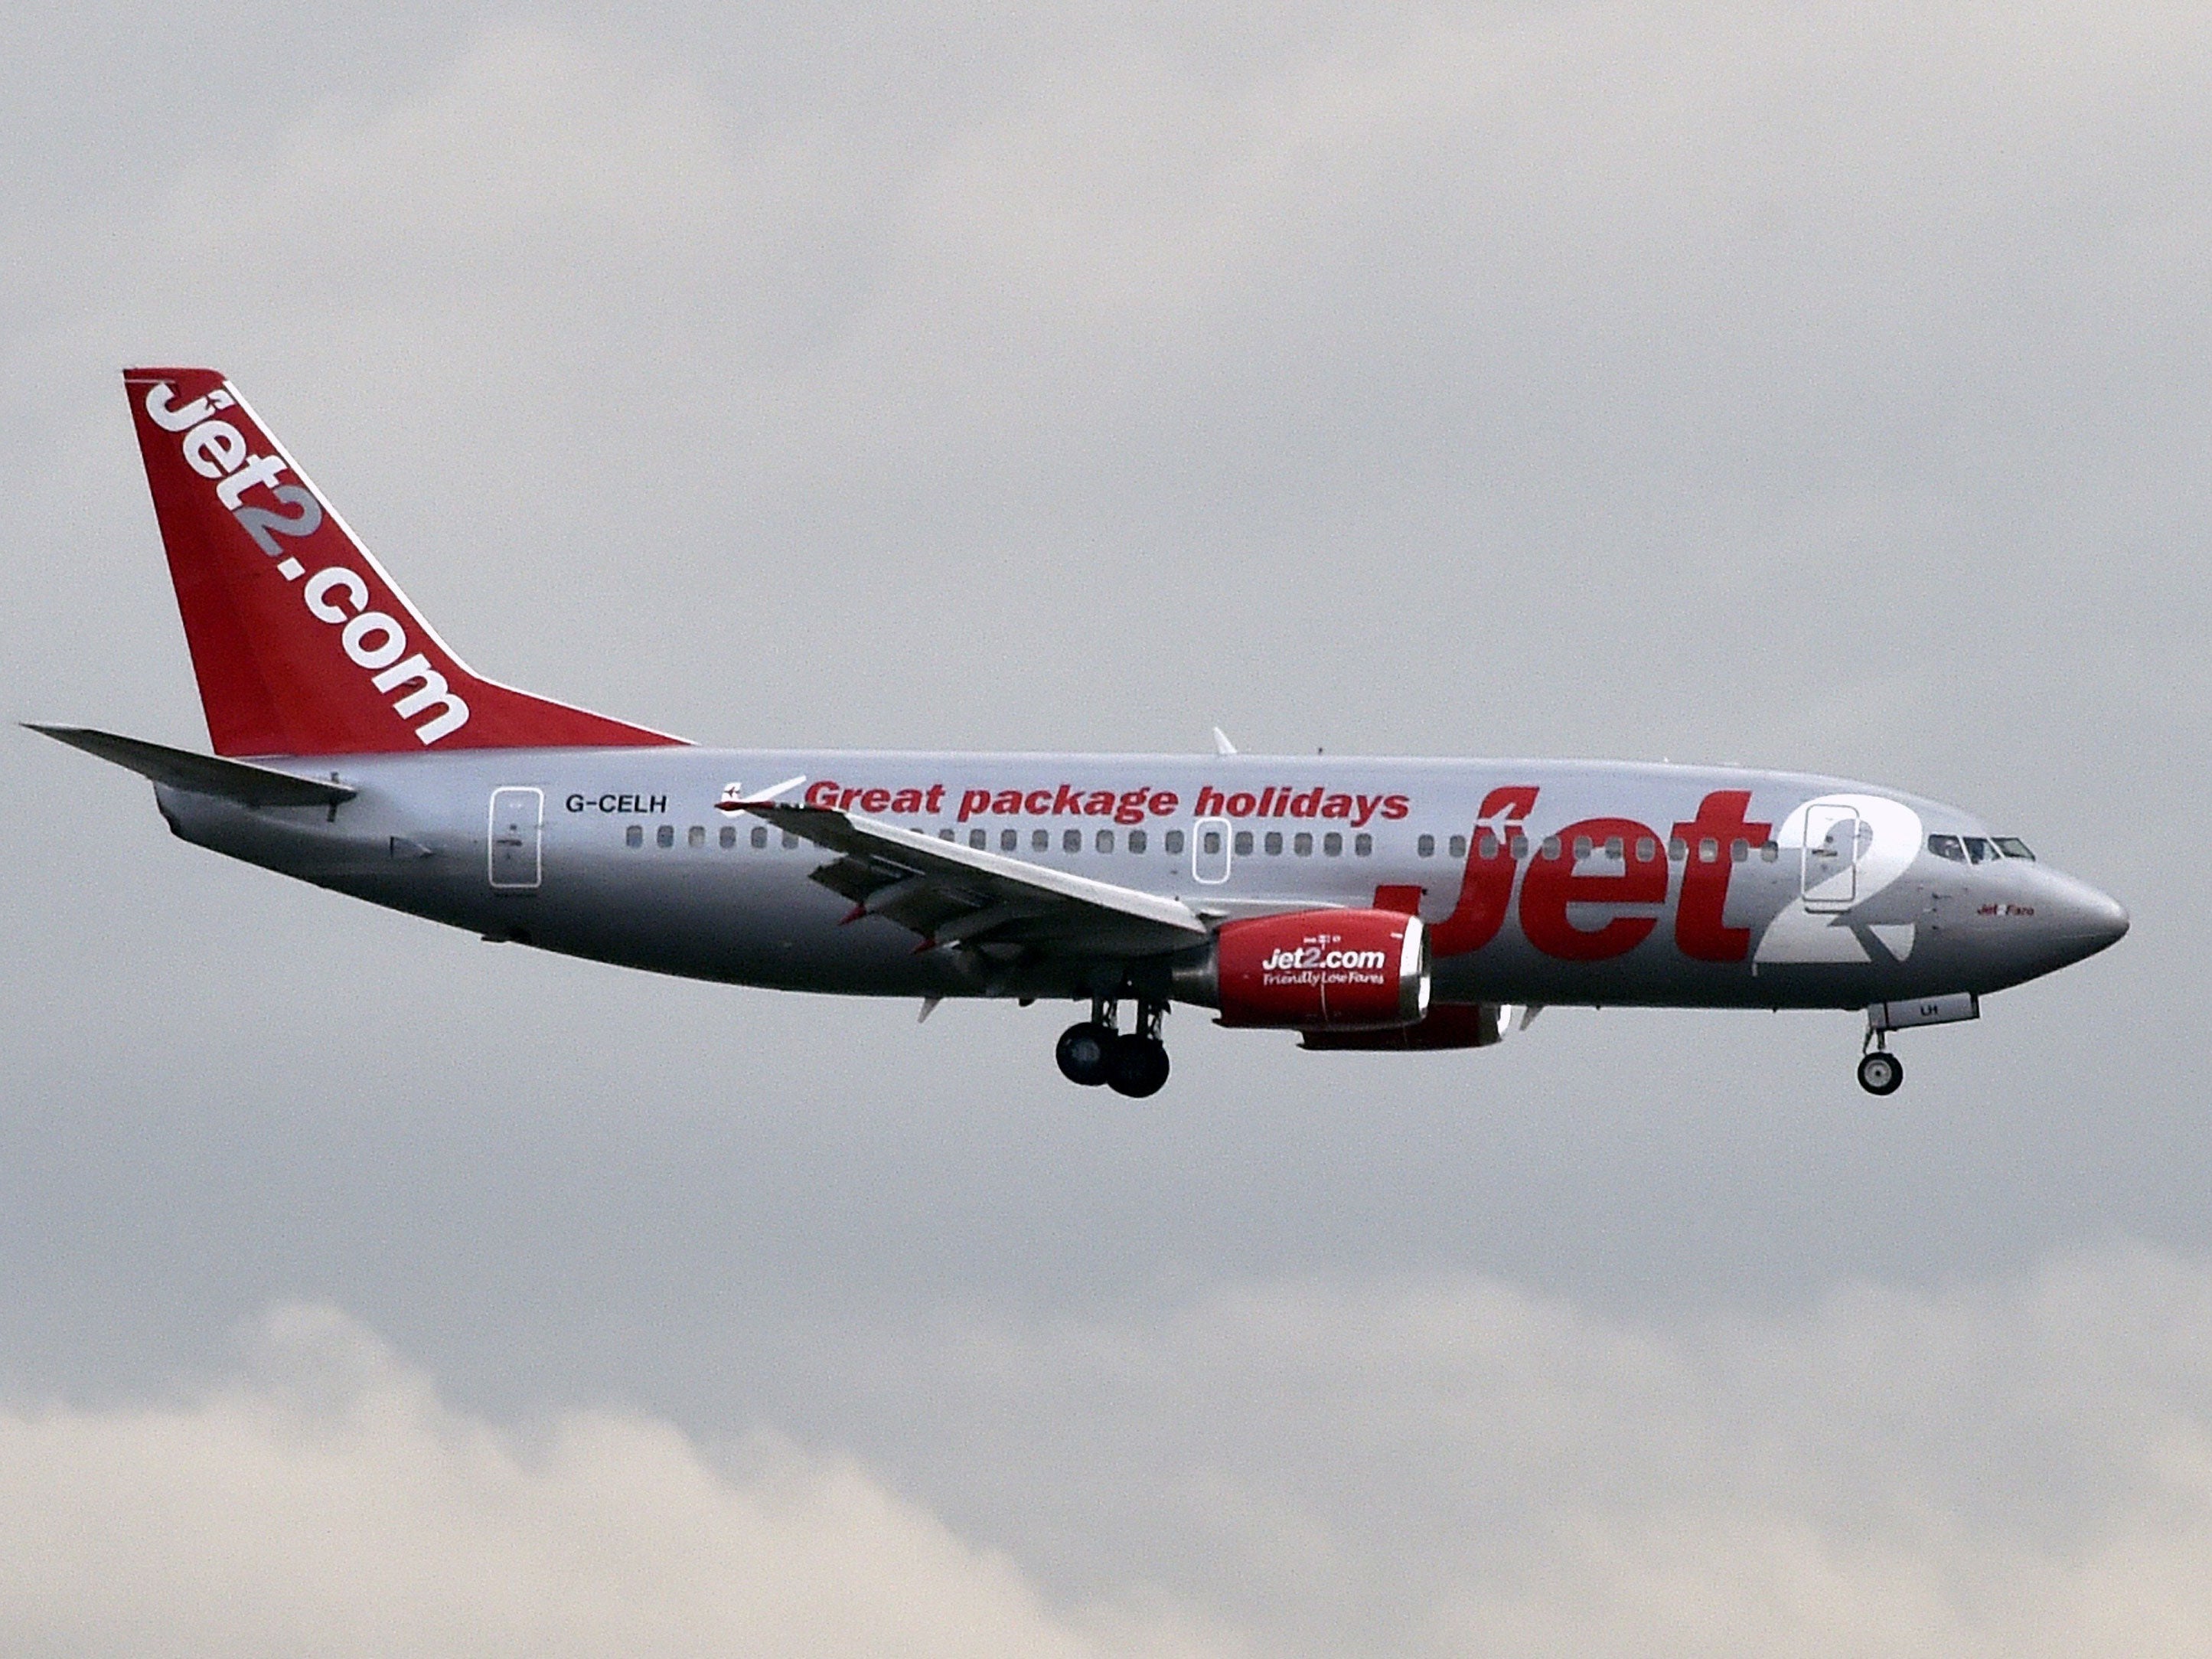 A Jet2 plane lands at Toulouse airport in 2014